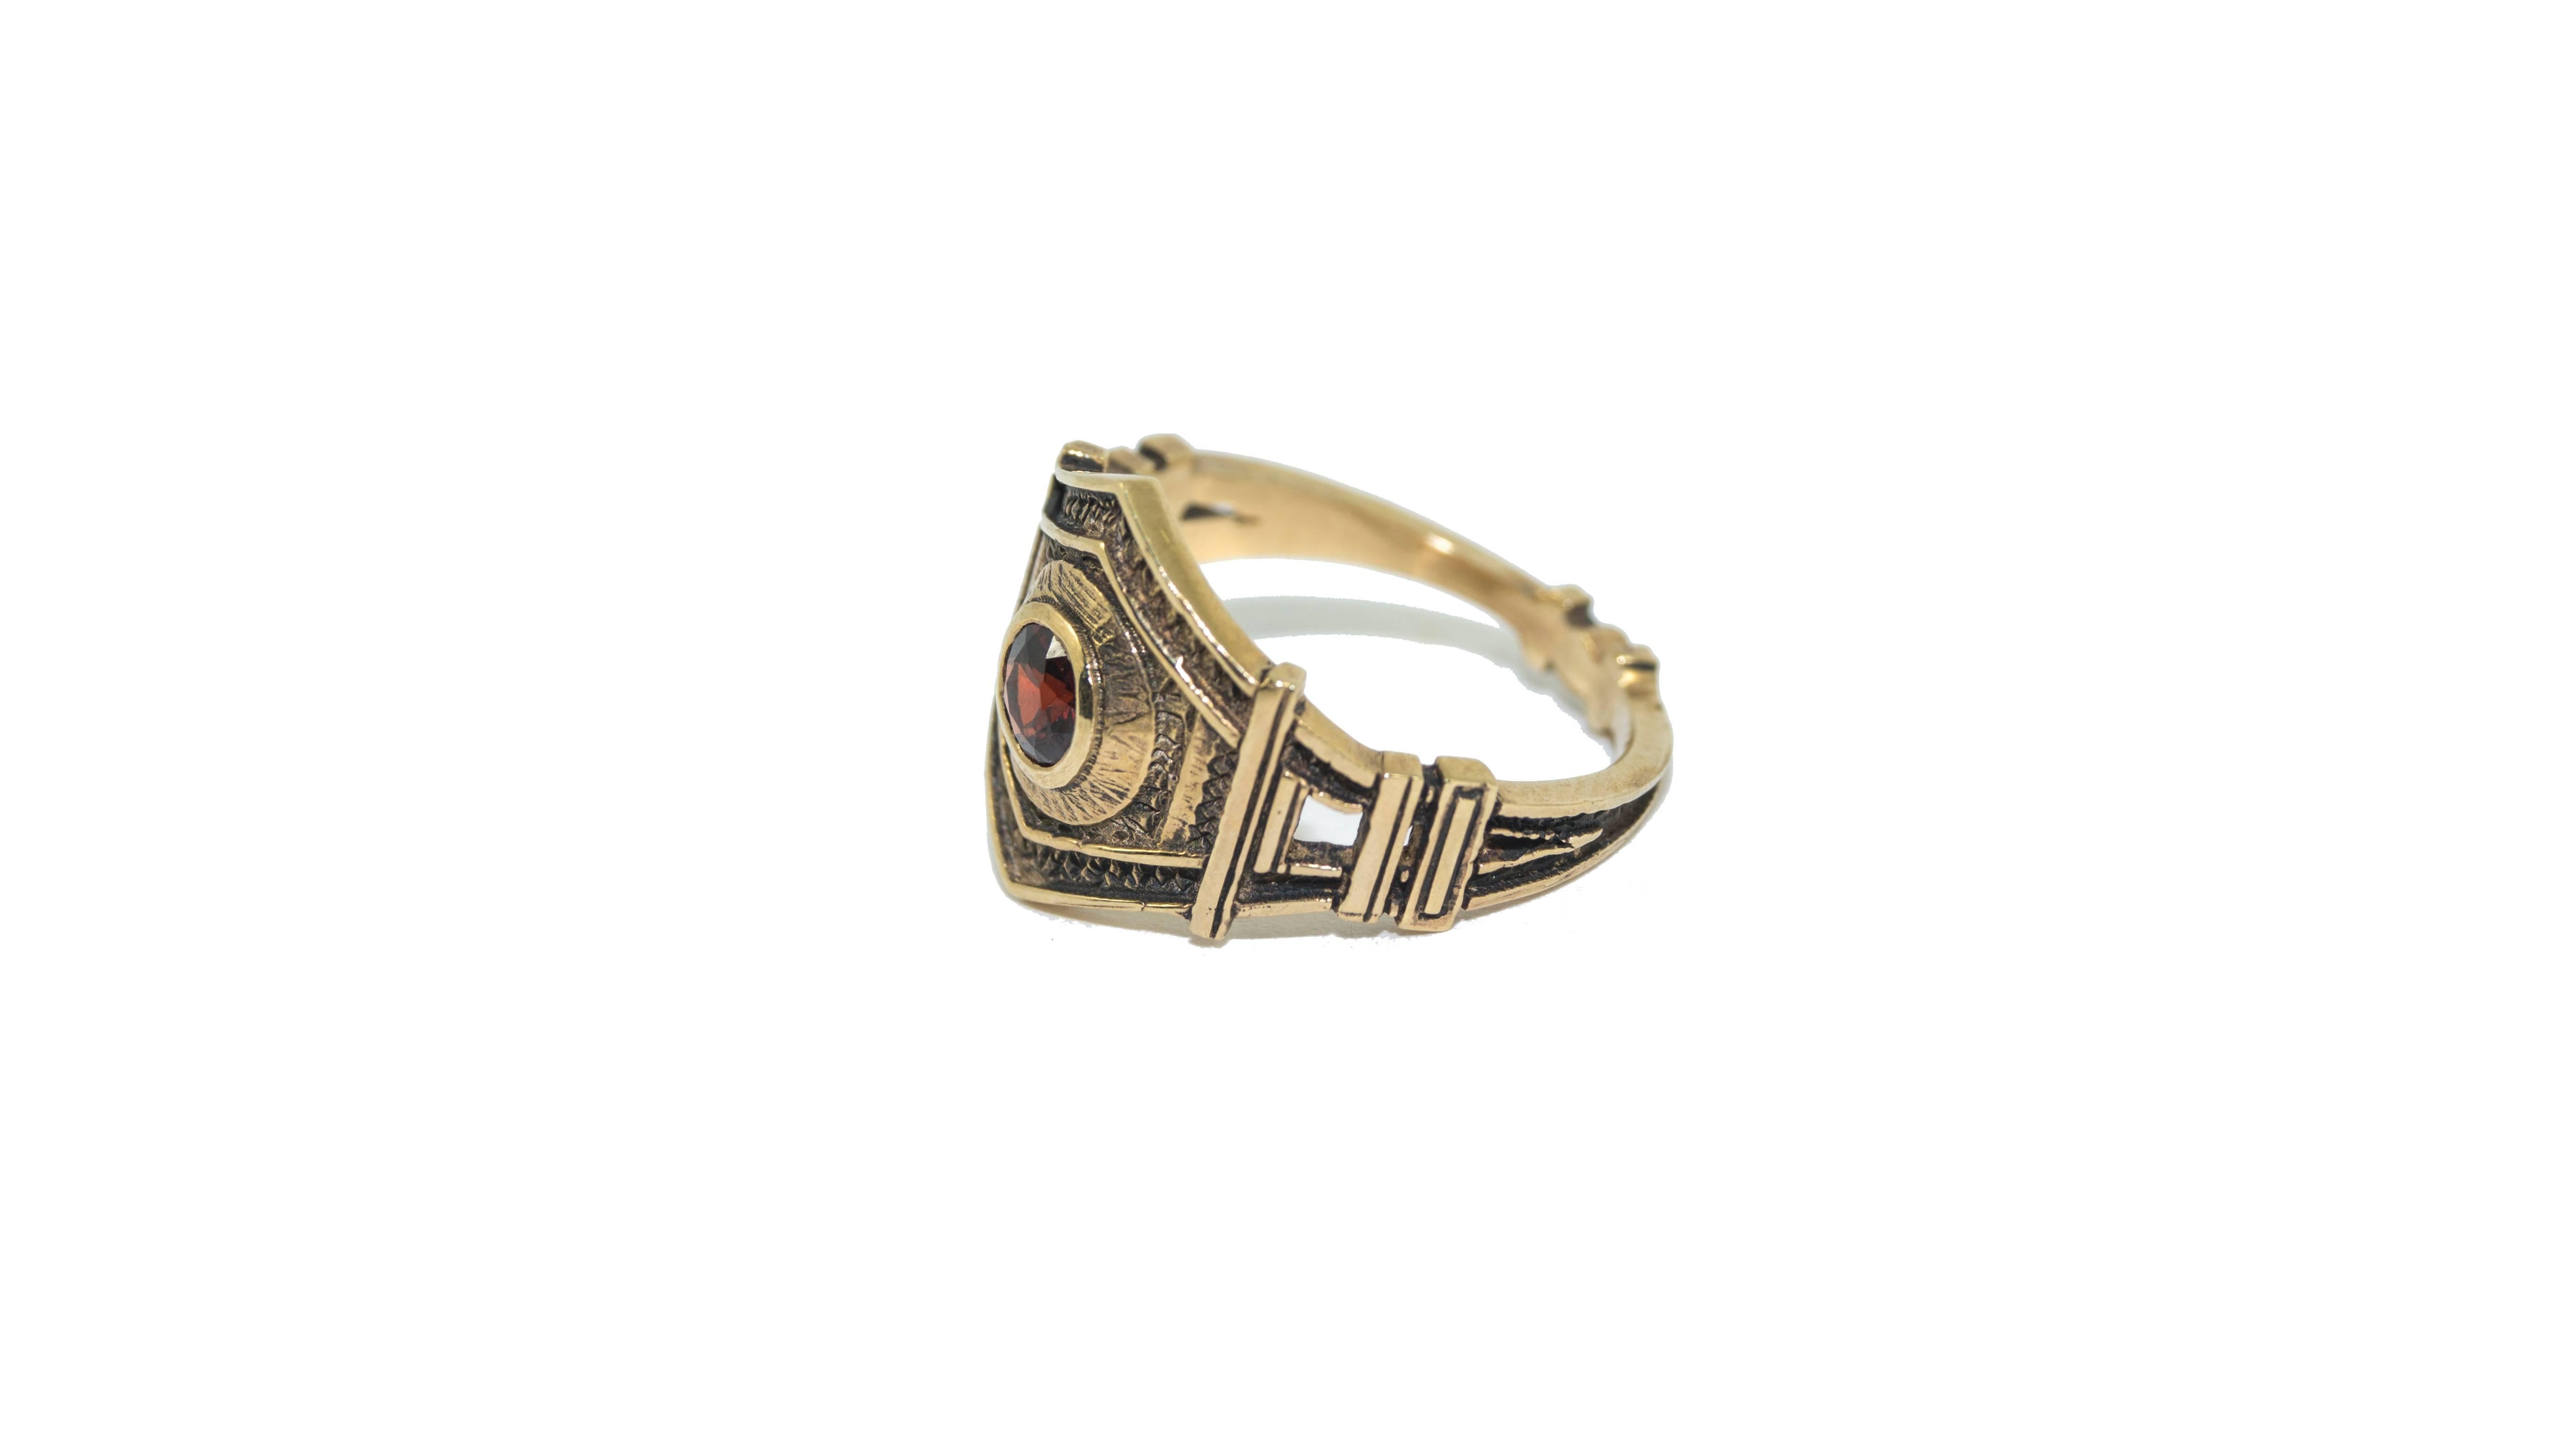 *MADE TO ORDER - 5 WEEK LEAD TIME*

9ct Yellow gold Zara Simon Paris ring with 4mm Garnet and hand engraved details.